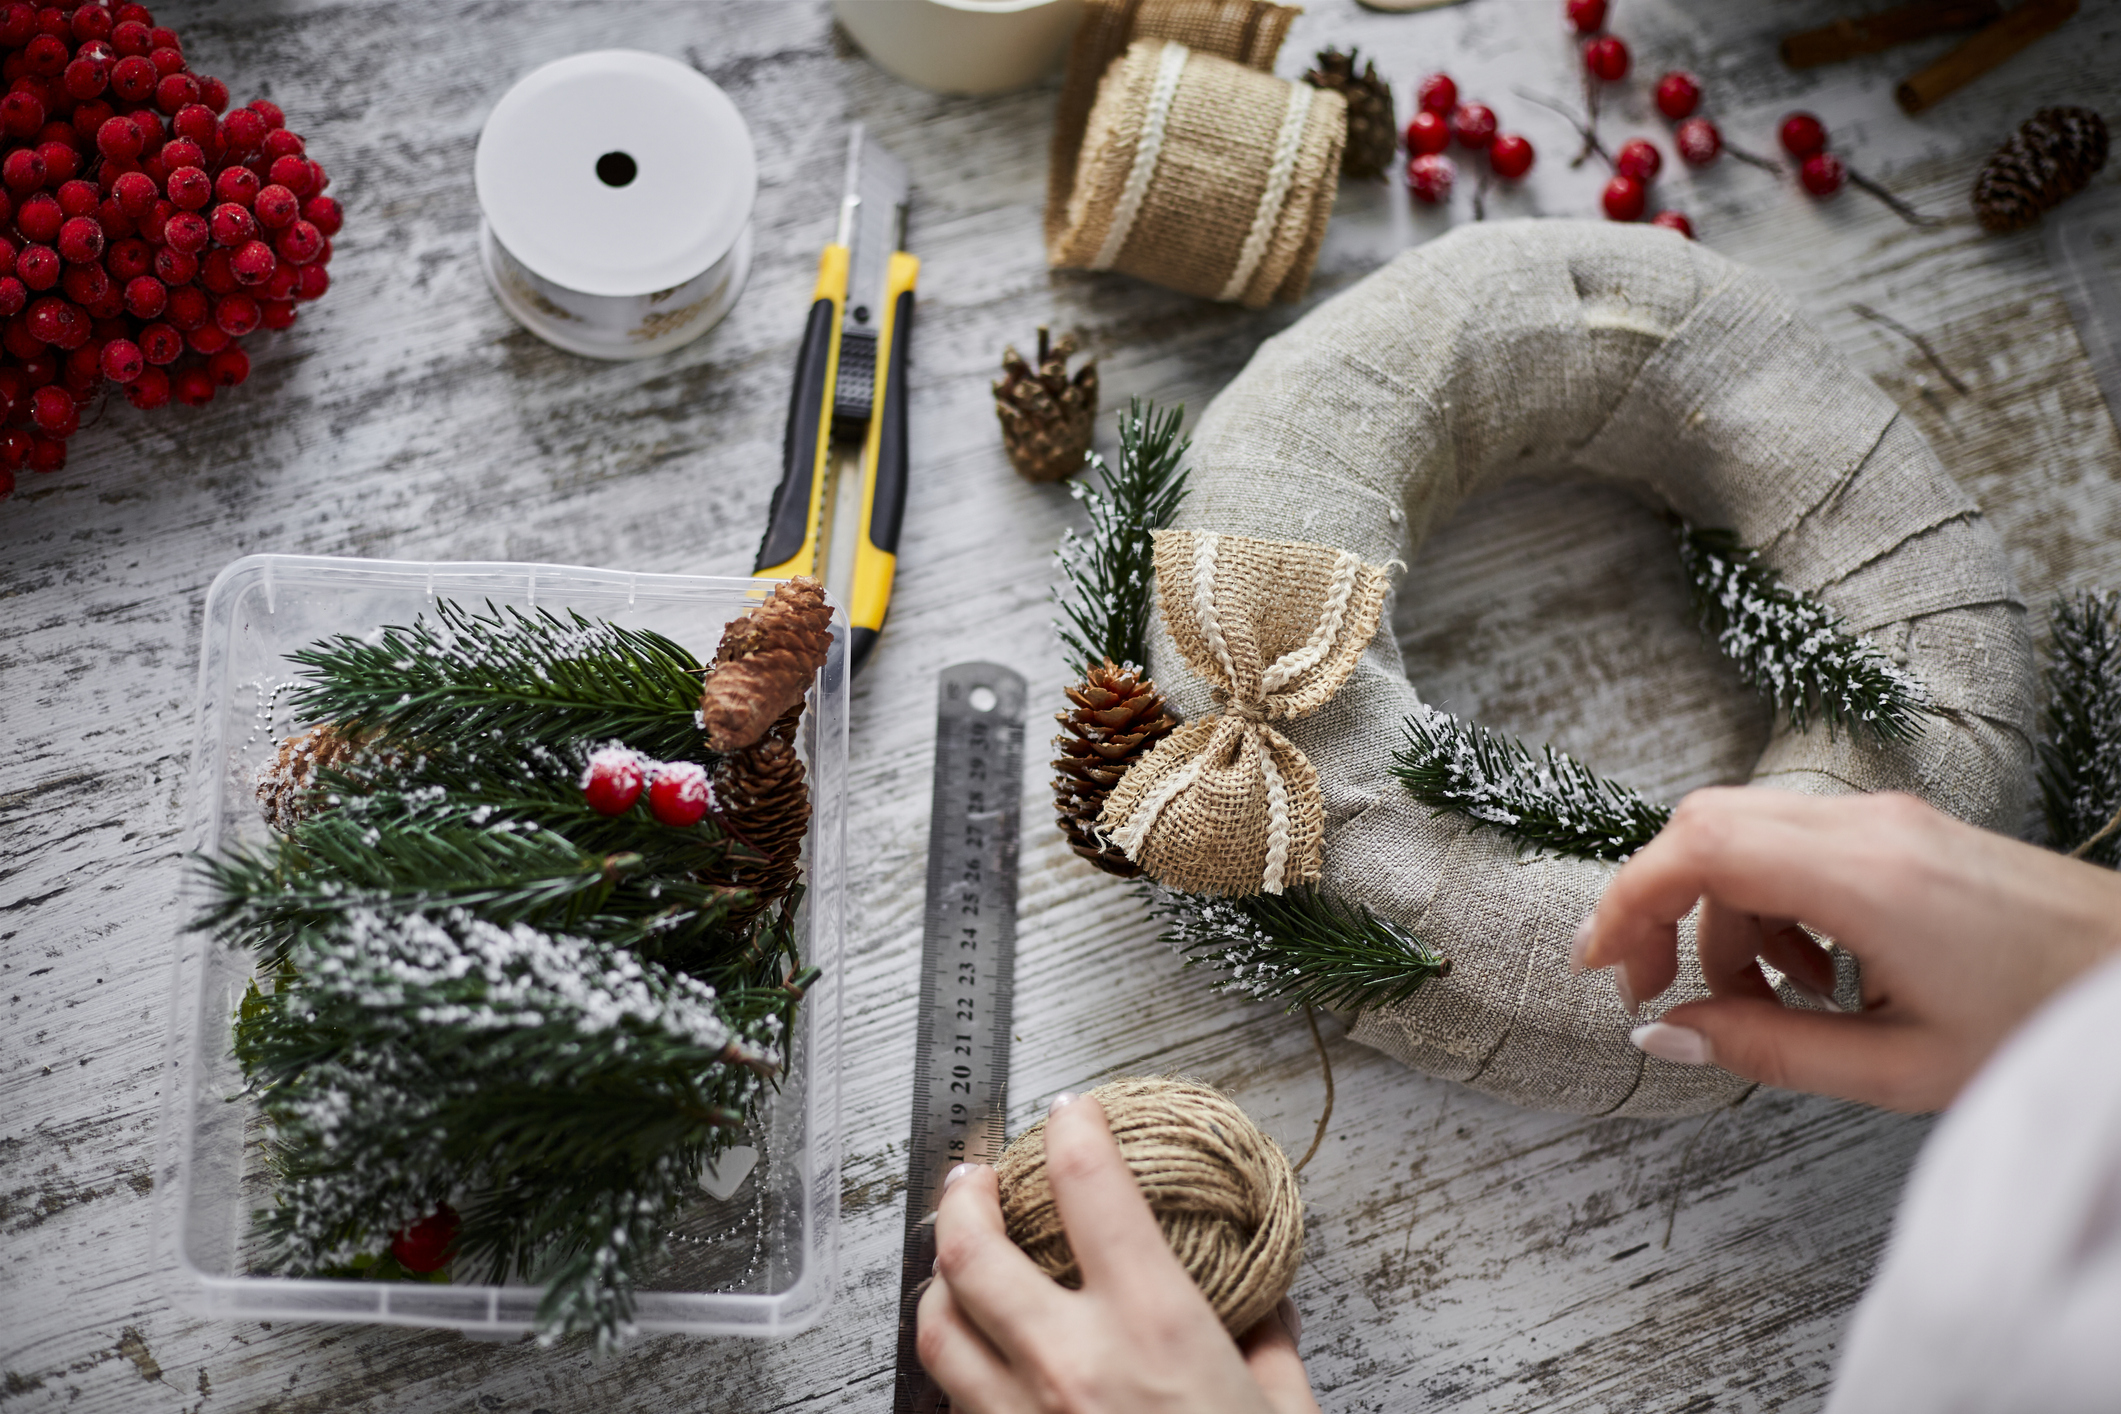 Need a new Christmas wreath? Why not make one!